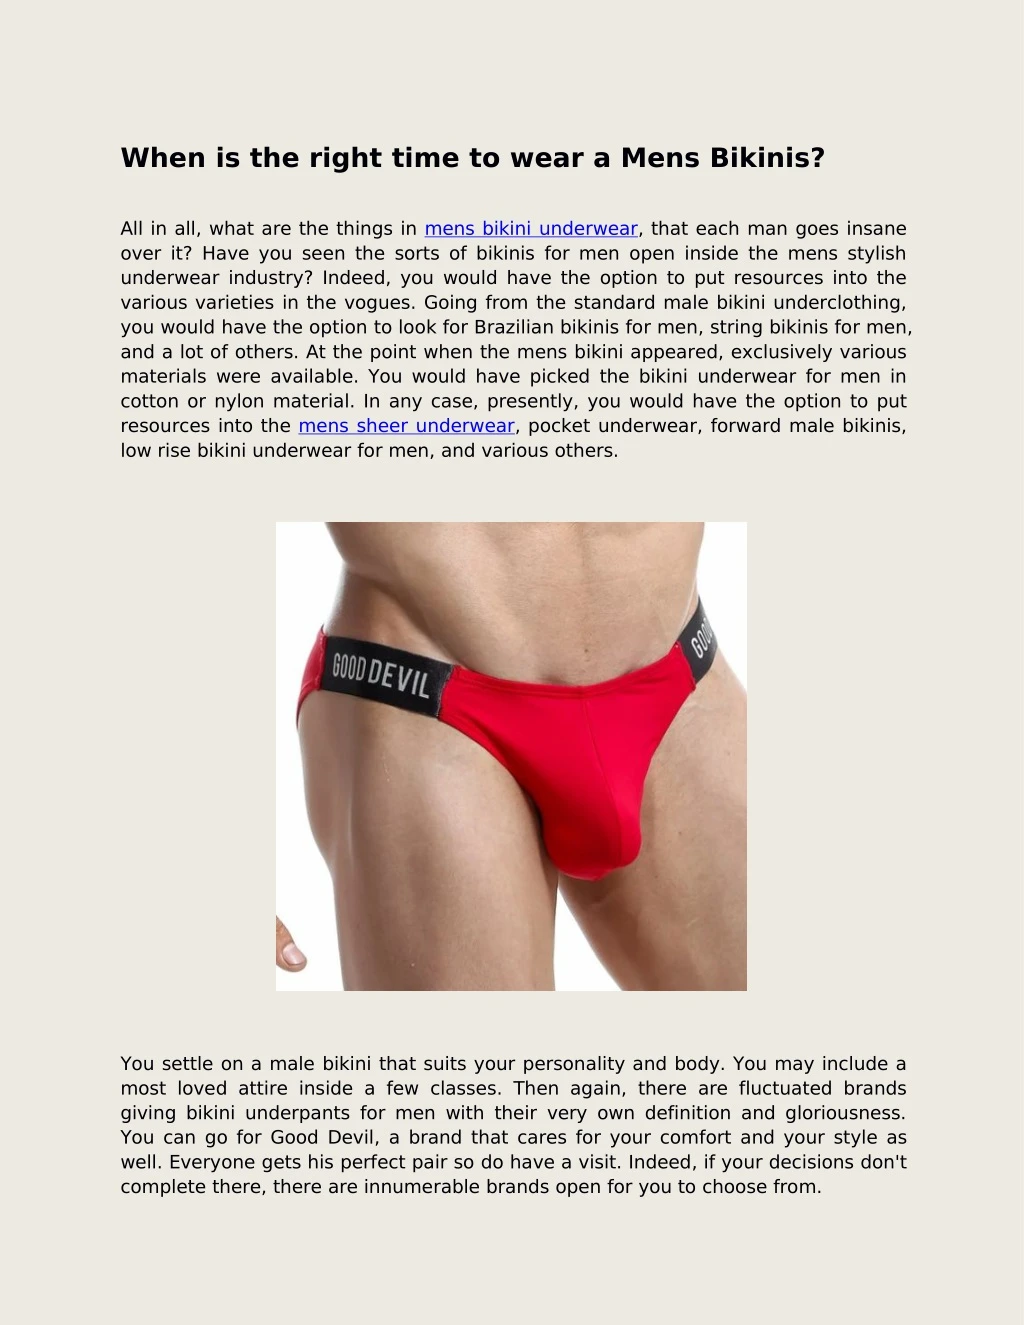 when is the right time to wear a mens bikinis